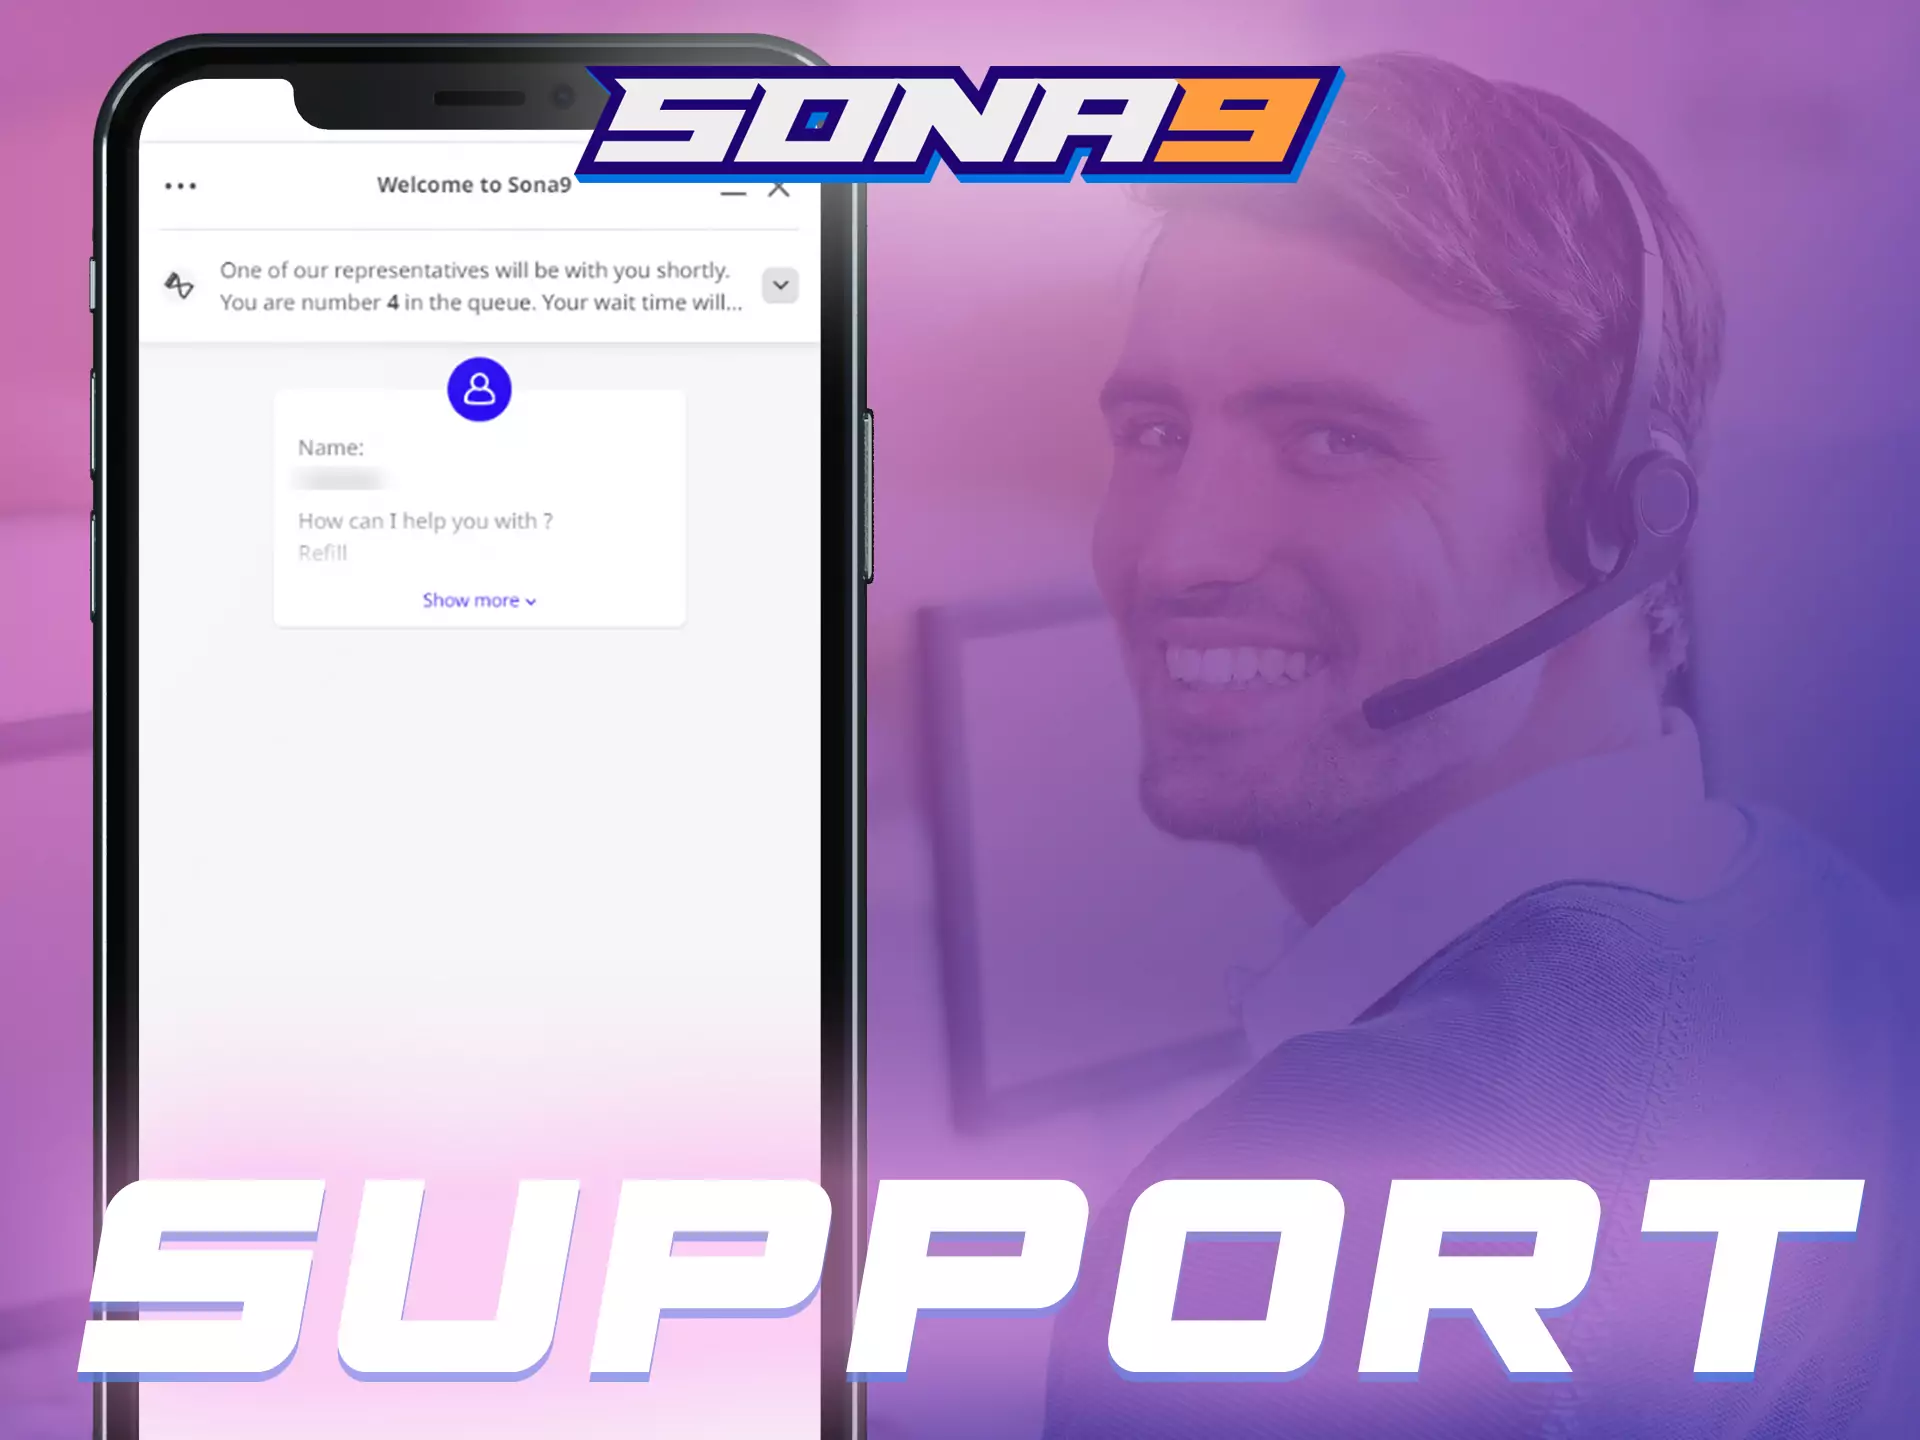 Users who have questions can contact the Sona9 team right in the app.